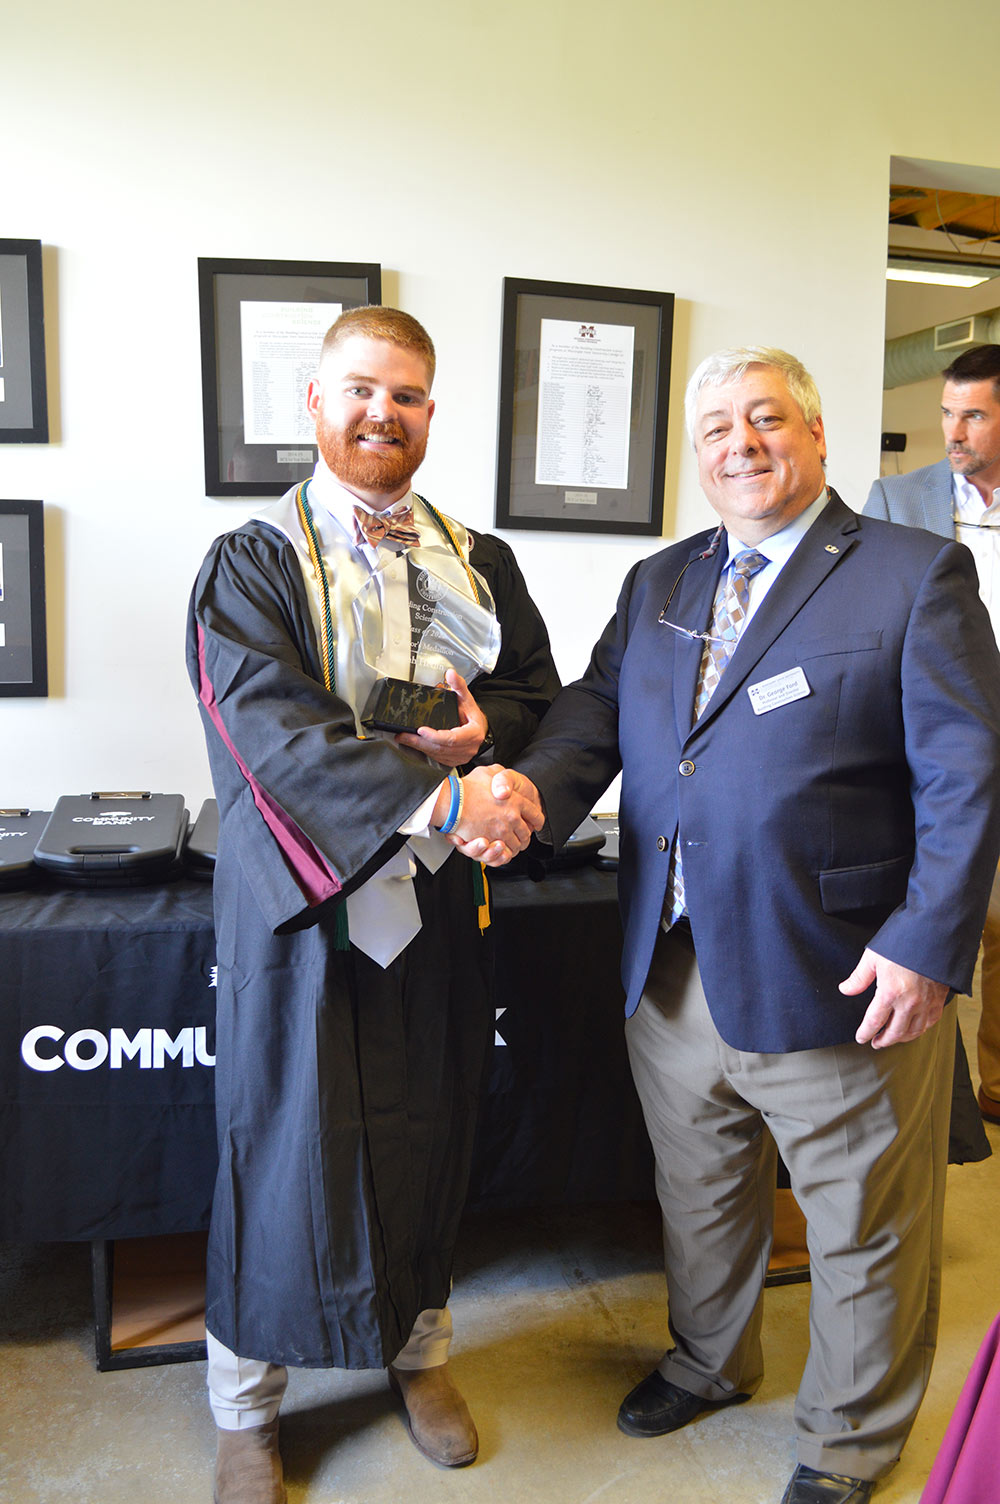 A graduating senior stands with a faculty member shaking hands for a picture.